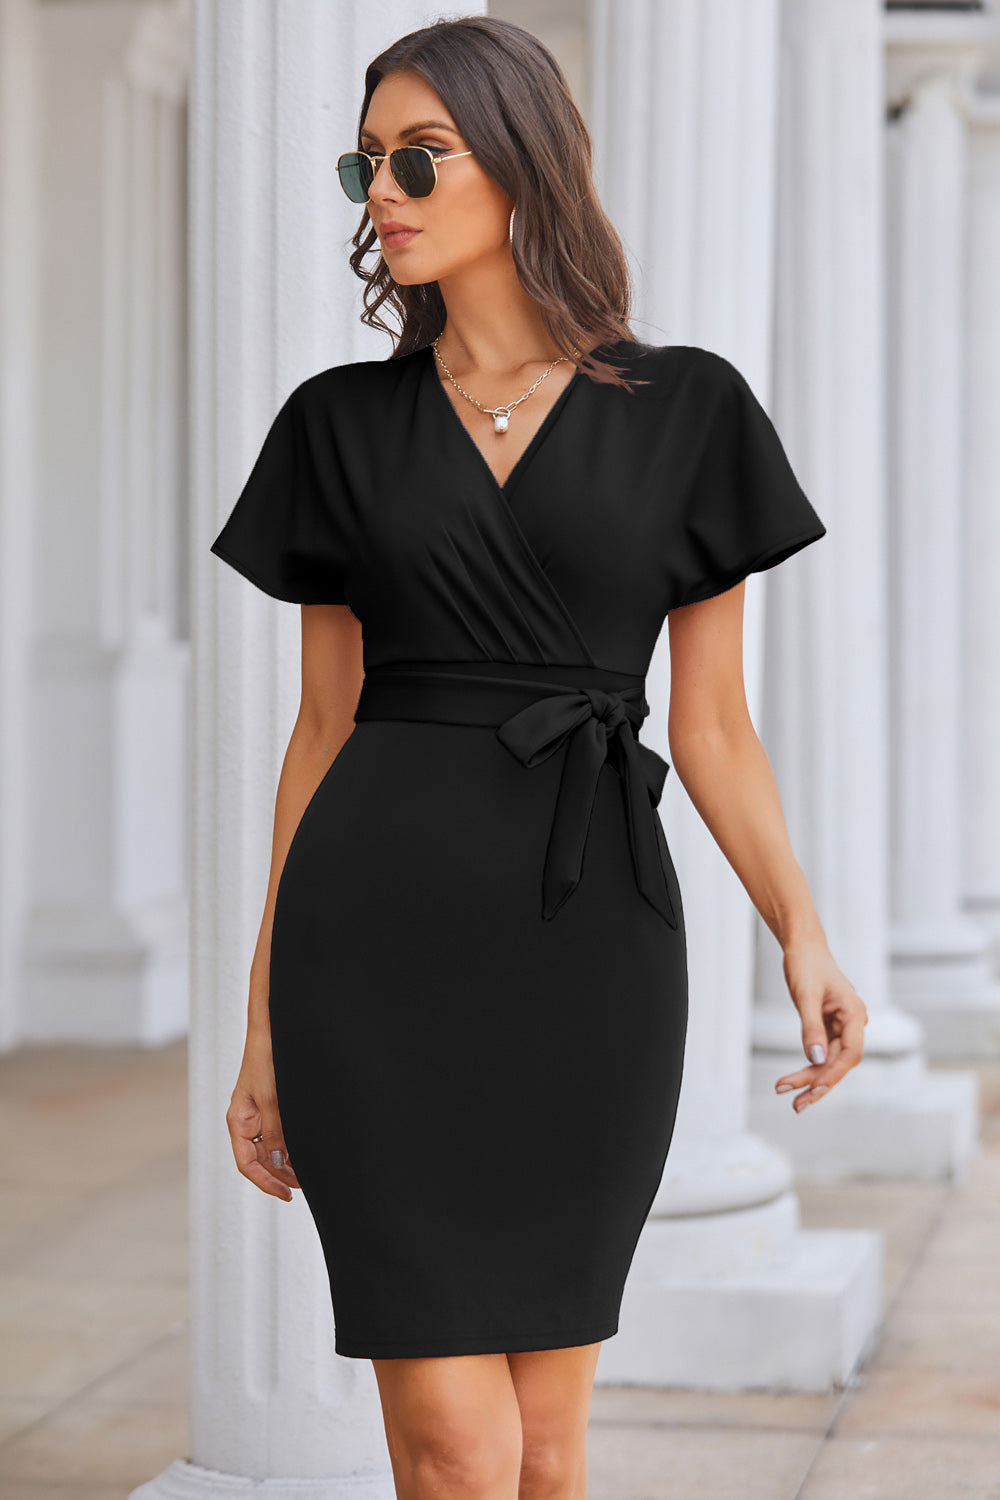 【Only $9.99】GRACE KARIN Short Sleeve With Belt Bodycon Dress